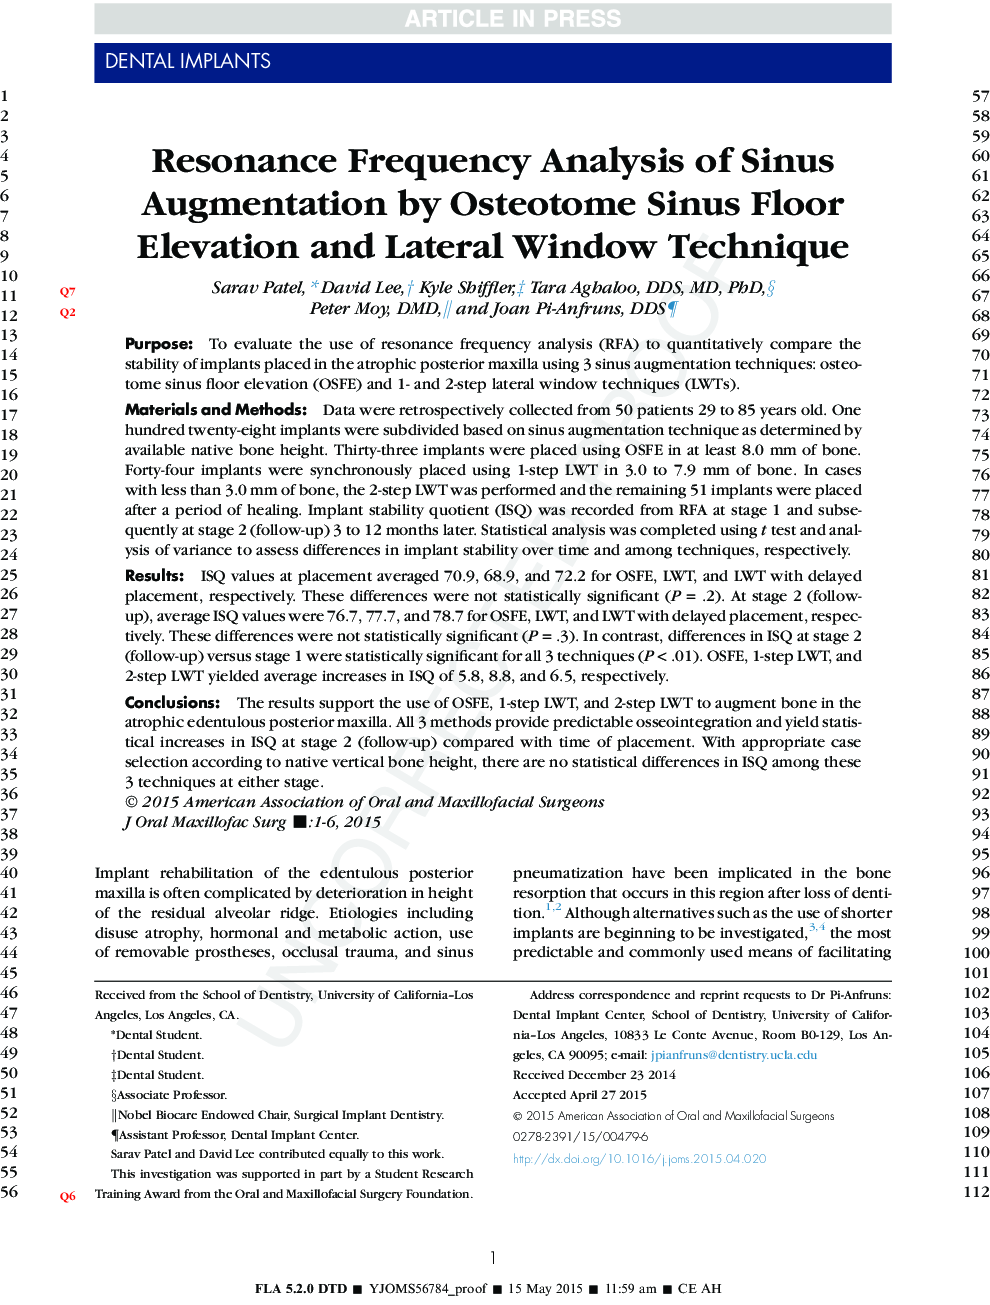 Resonance Frequency Analysis of Sinus Augmentation by Osteotome Sinus Floor Elevation and Lateral Window Technique